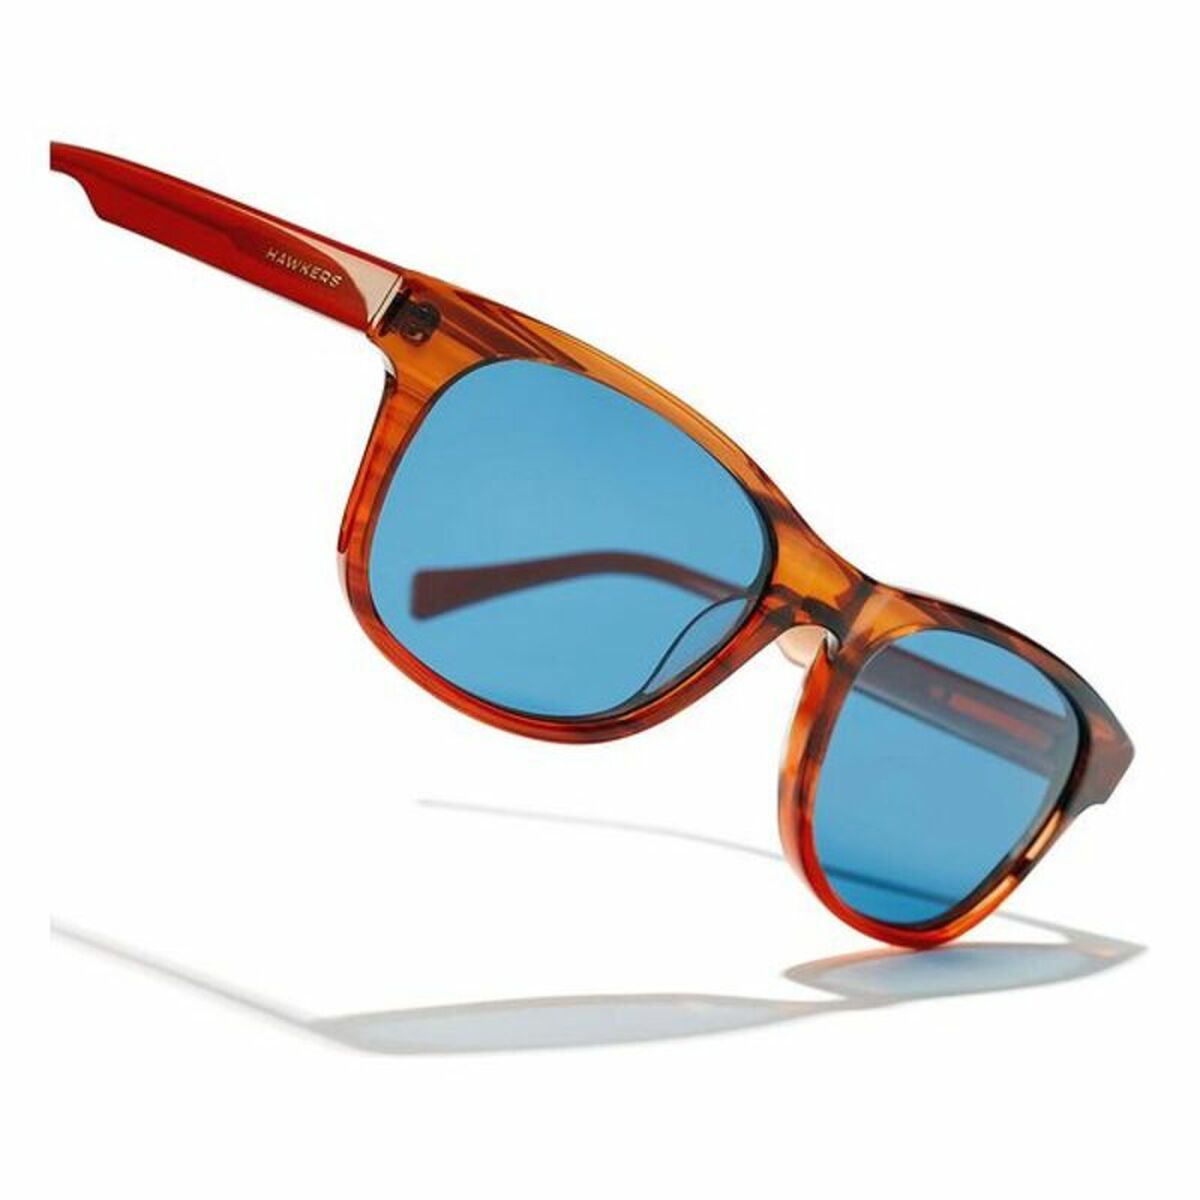 Unisex Sunglasses Nº35 Hawkers Blue Brown